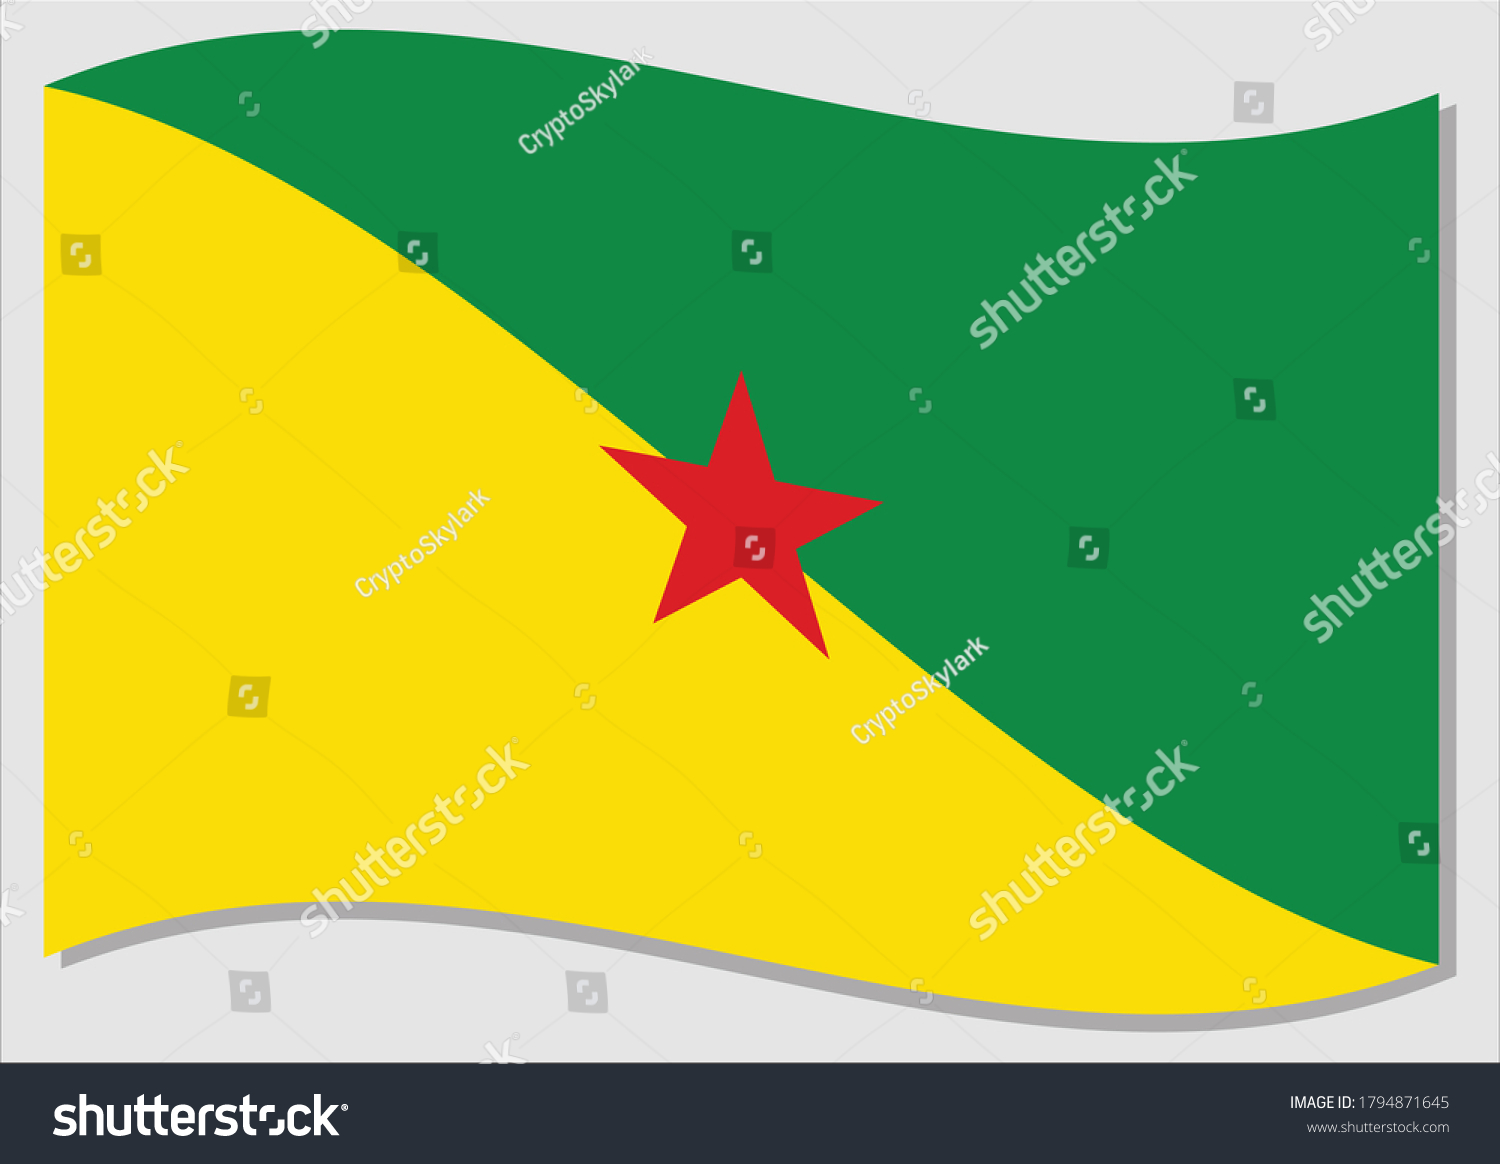 SVG of Waving flag of French Guiana vector graphic. Waving Guyanese flag illustration. French Guiana country flag wavin in the wind is a symbol of freedom and independence. svg